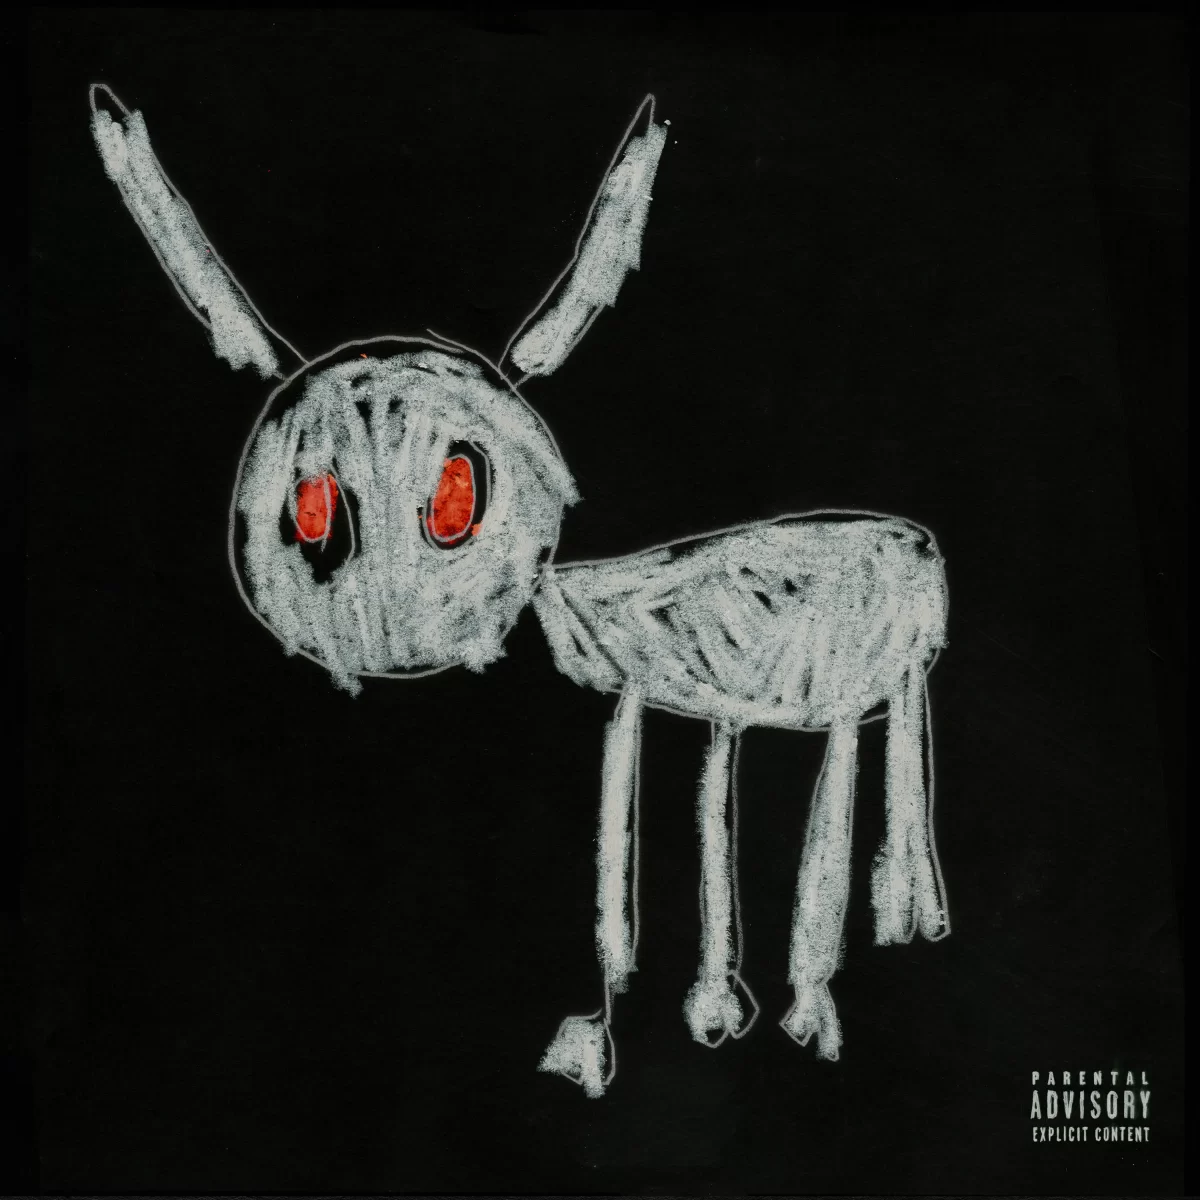 ‘For All the Dogs’ album cover artwork created by Drake’s 5 year old son, Adonis. This album brings back the classic Drake from the past and reveals somewhat of his old music in a matured form. 